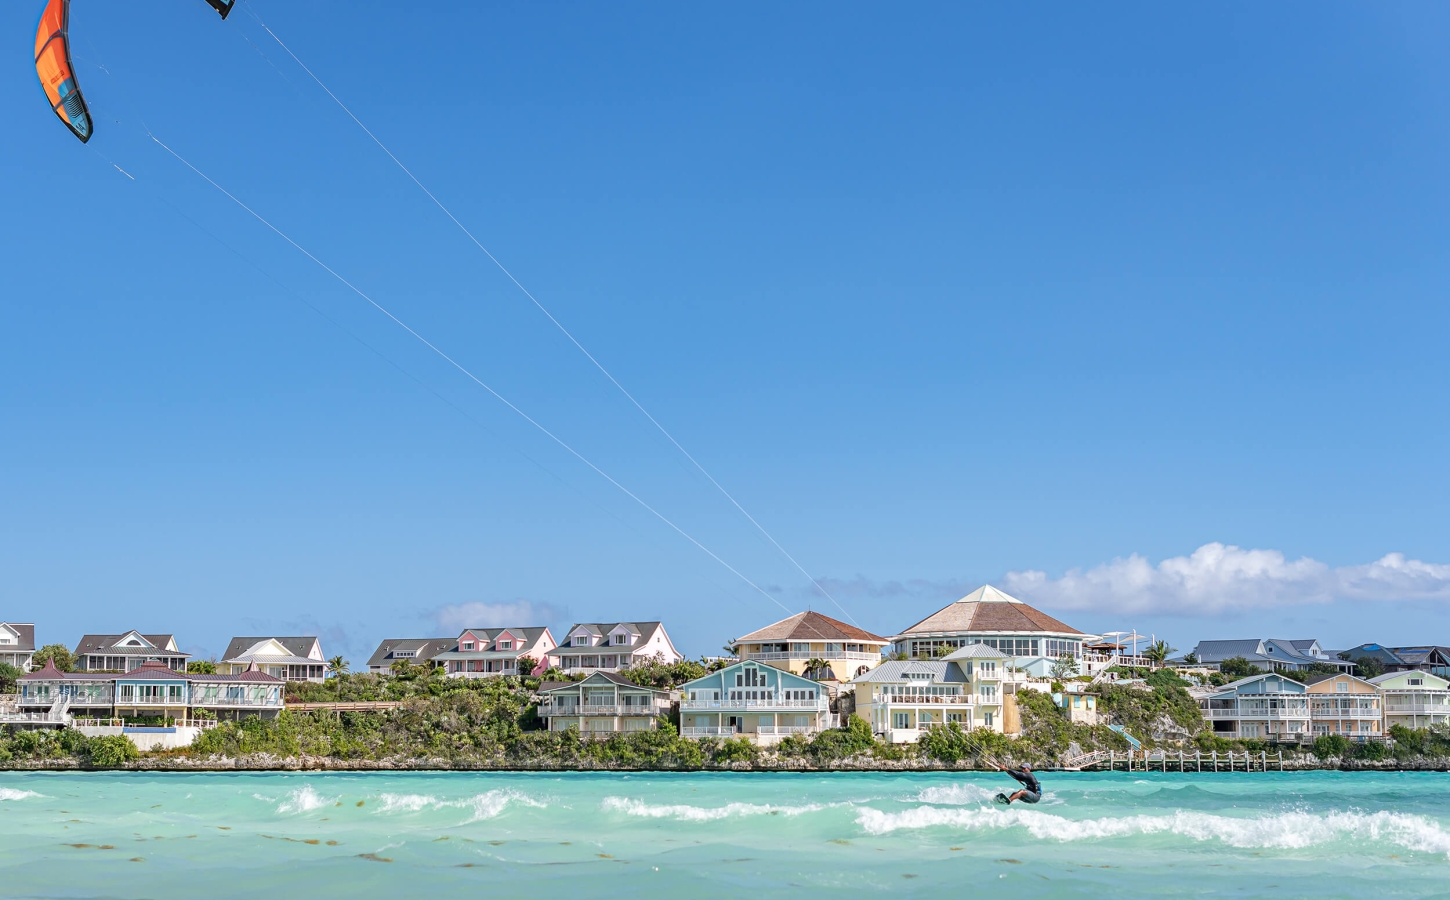 A person kite surfing enjoying exclusive coastal lifestyle at The Abaco Club